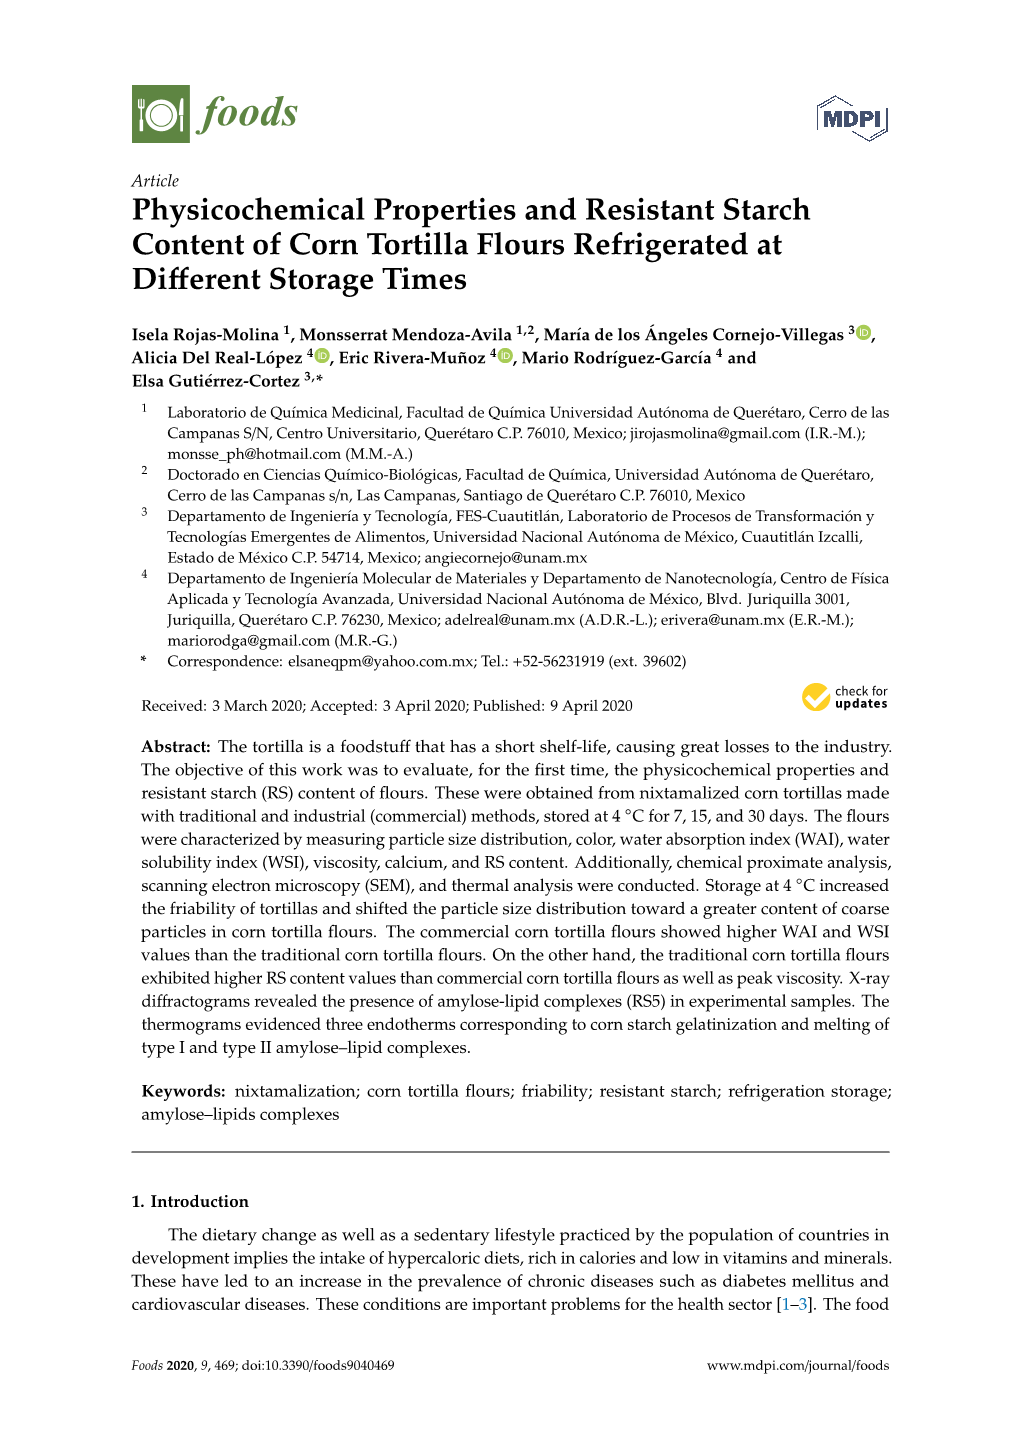 Physicochemical Properties and Resistant Starch Content of Corn Tortilla Flours Refrigerated at Diﬀerent Storage Times